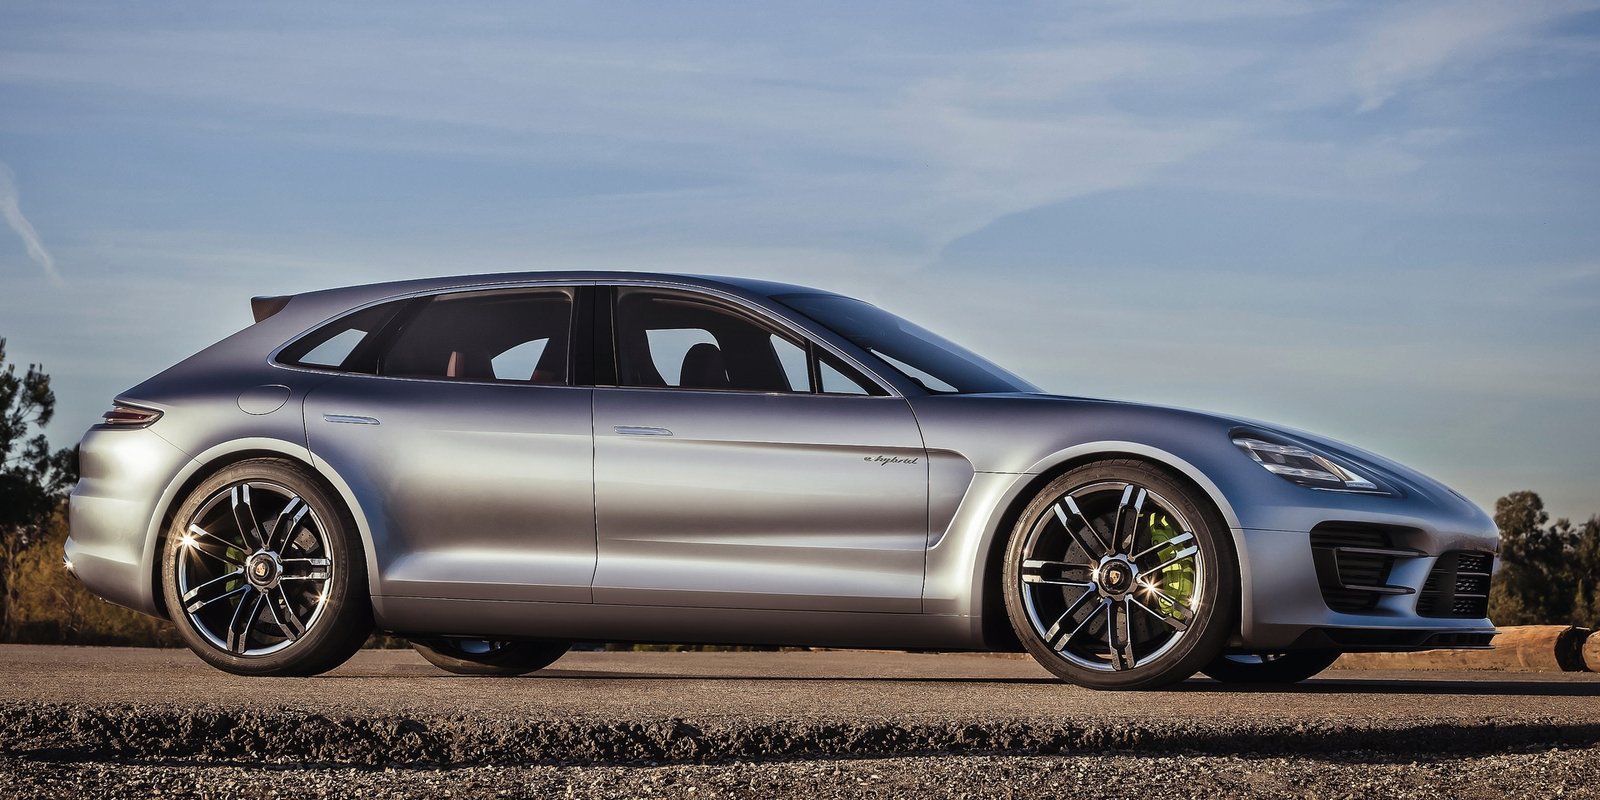 The Next Panamera Turbo Will Lap the 'Ring Faster Than the Porsche Carrera  GT